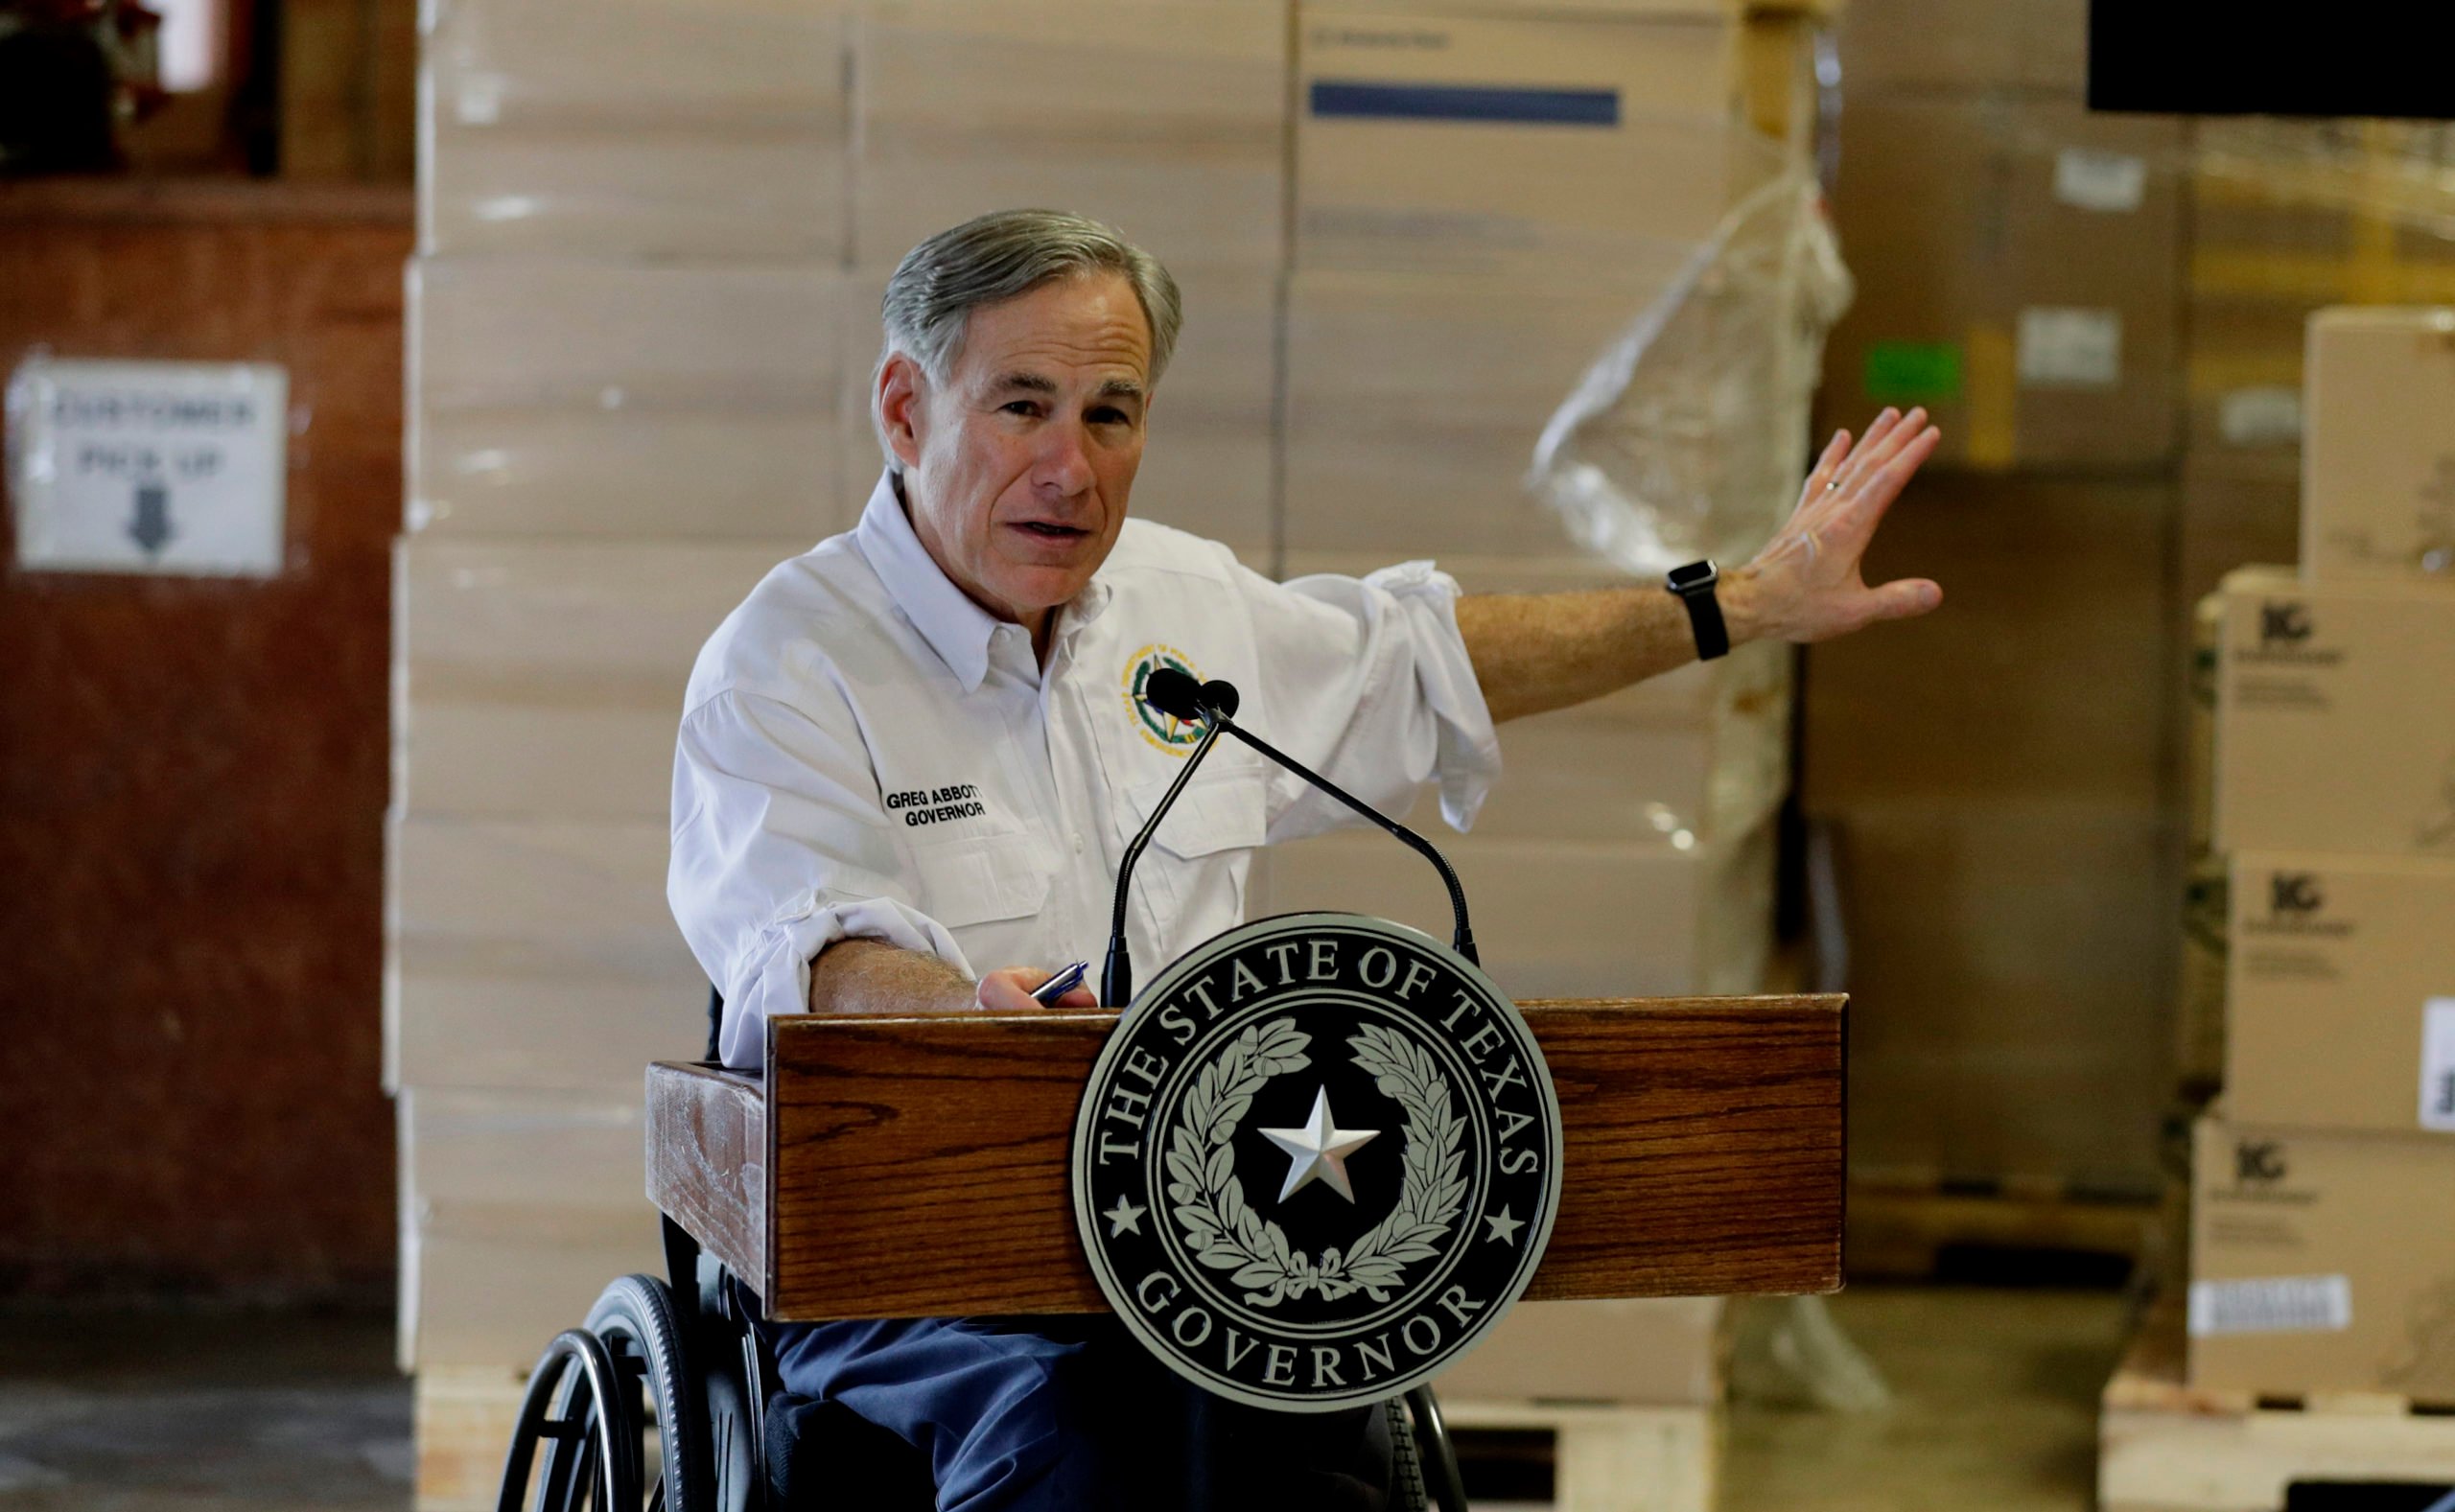 Texas Gov. Greg Abbott gives an update on the COVID-19 outbreak at the Texas Department of Public Safety warehouse facility in Austin, Texas, Monday, April 6, 2020. (AP Photo/Eric Gay)